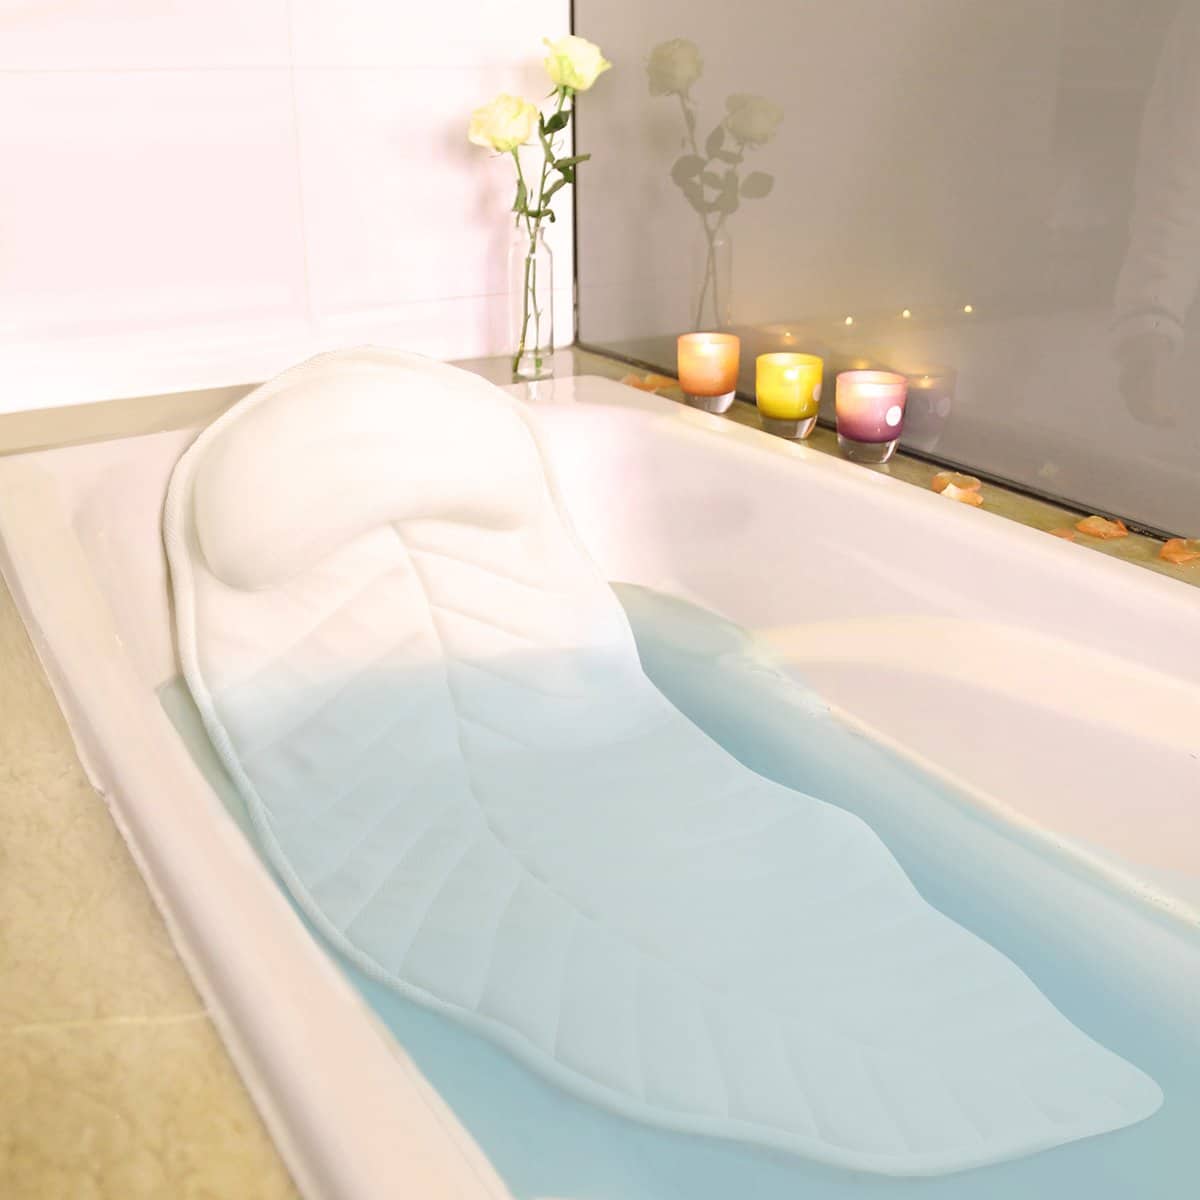 Top 10 Best Bath Pillows in 2020 Reviews  Buyer's Guide